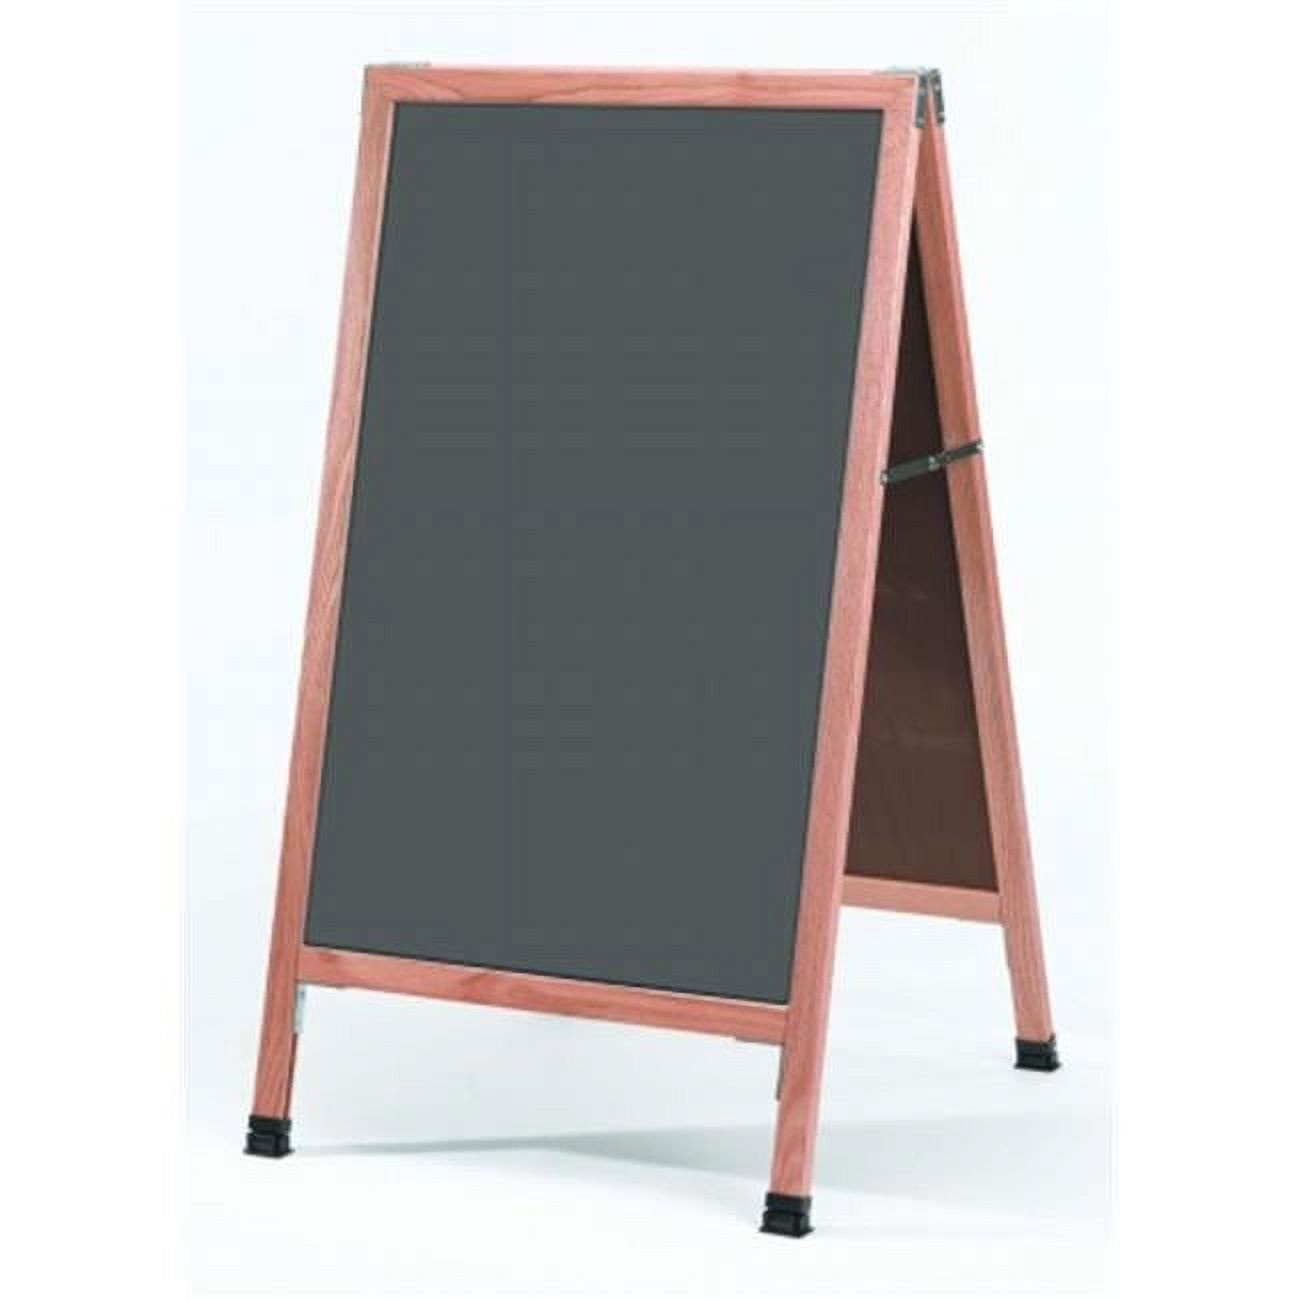 Aarco Products  Inc. A-1SS A-Frame Sidewalk Board Features a Slate Colored Porcelain Chalkboard and Solid Red Oak Frame with a Clear Lacquer Finish. Size 42 in.Hx24 in.W - image 1 of 1